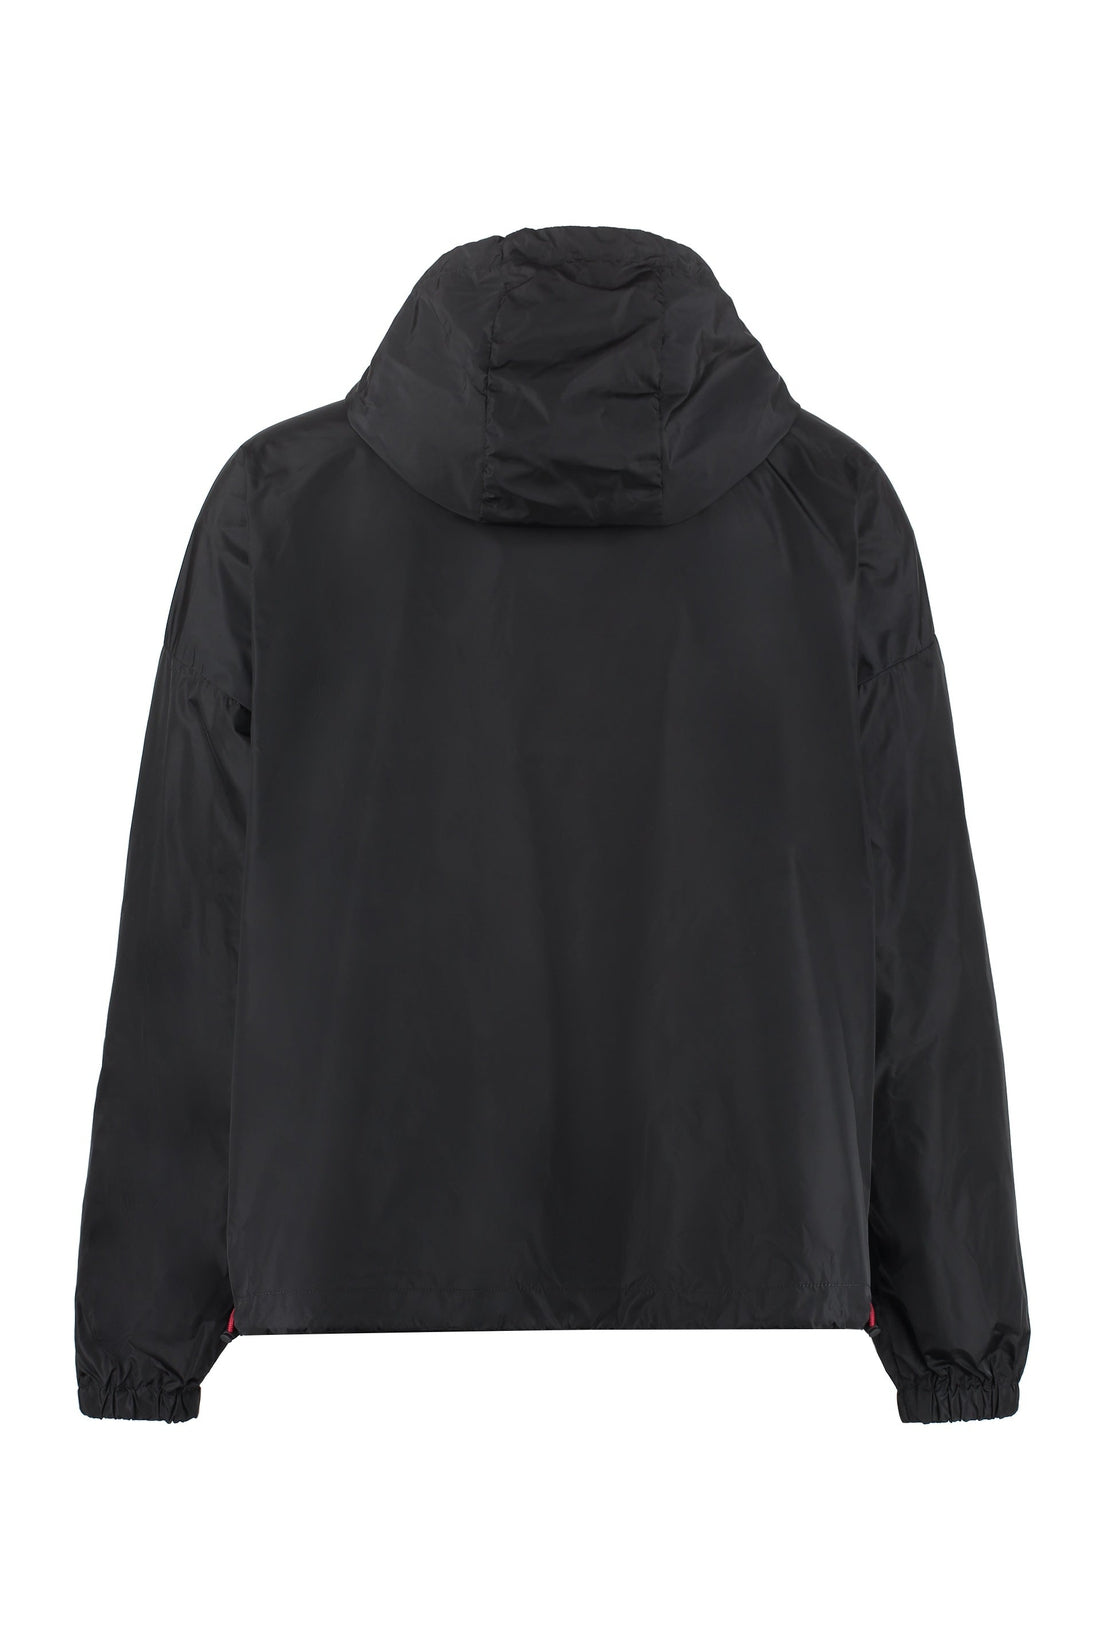 Dsquared2-OUTLET-SALE-Hooded techno fabric raincoat-ARCHIVIST